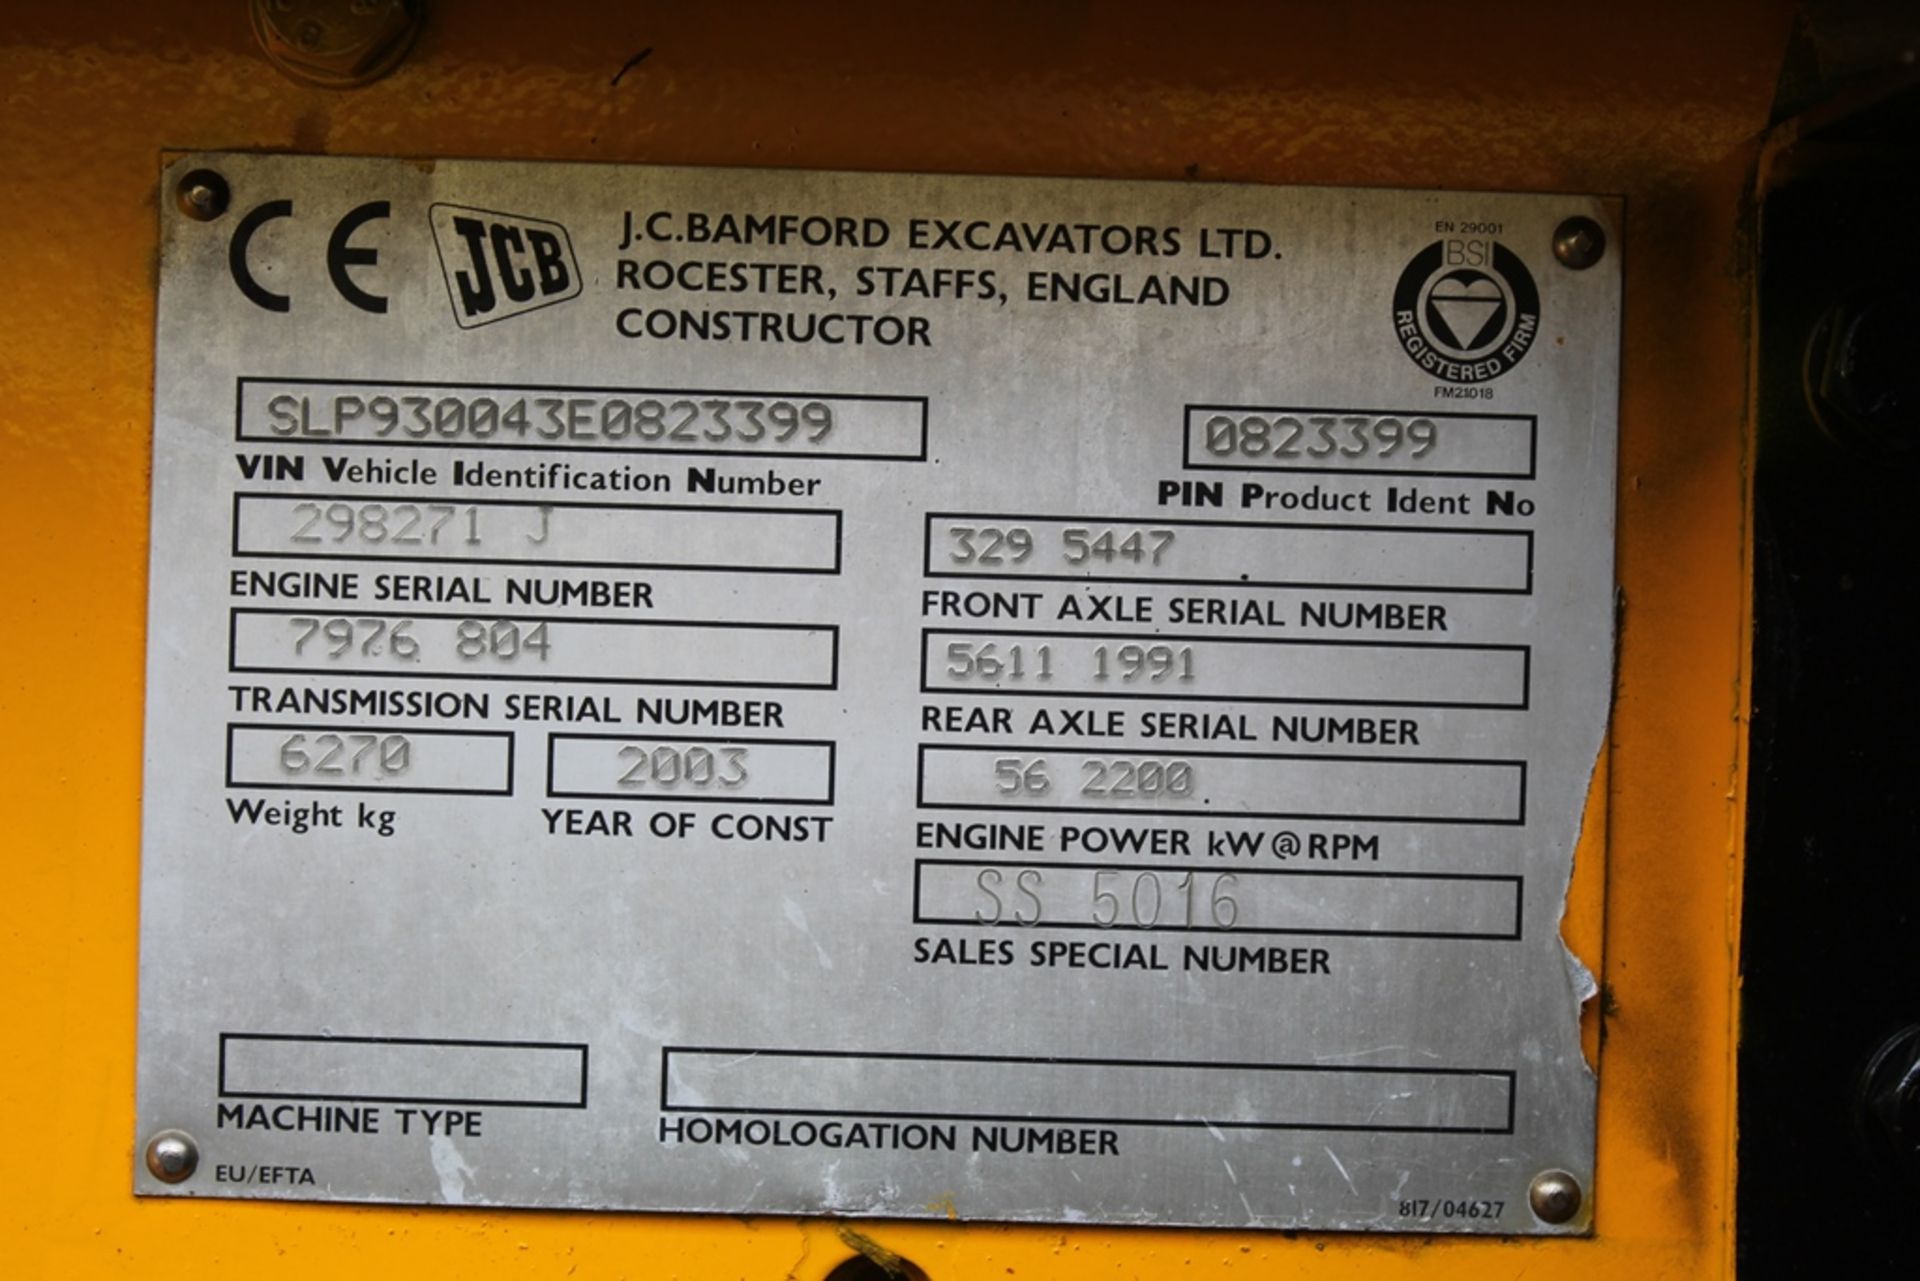 K1 SAM, , JCB 930 4WD, , 18, 143 HOURS - UNCHECKED, , YEAR 2003, , PLUS VAT, - Image 5 of 5